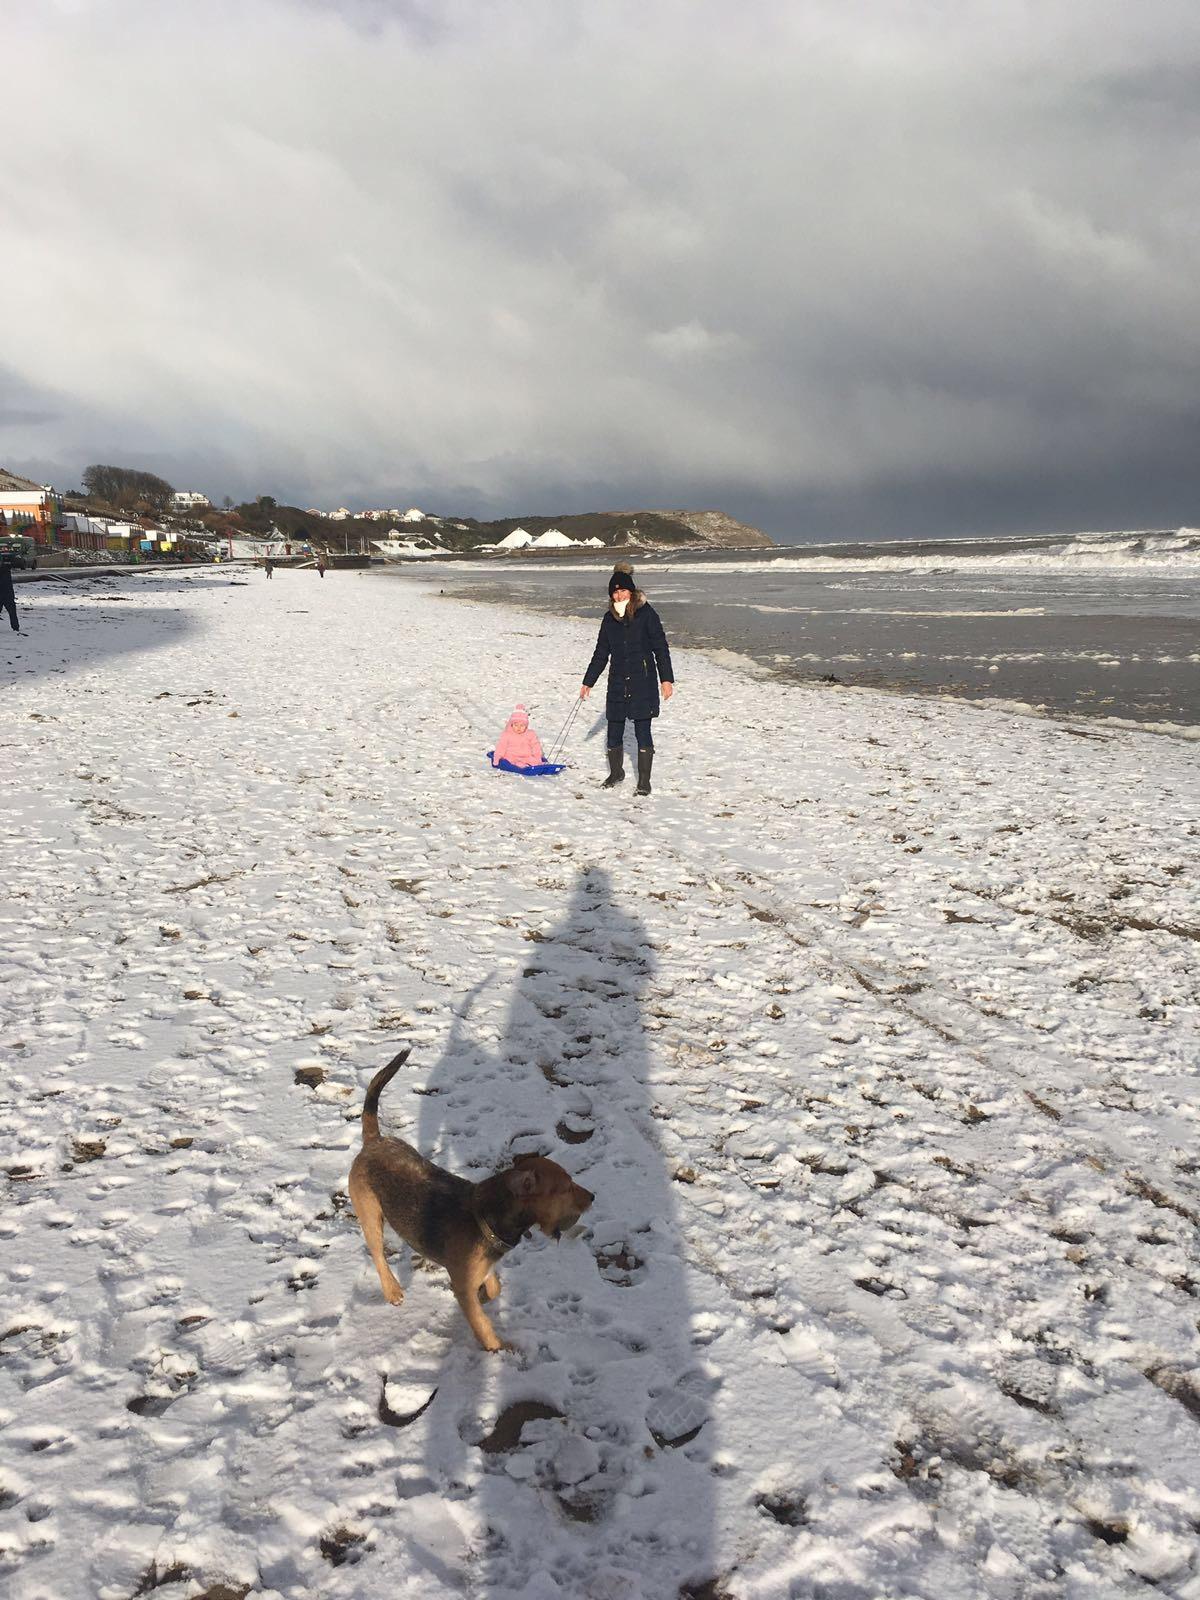 Snow on the beach at Scarborough' North Bay. Picture by Mark Vasey